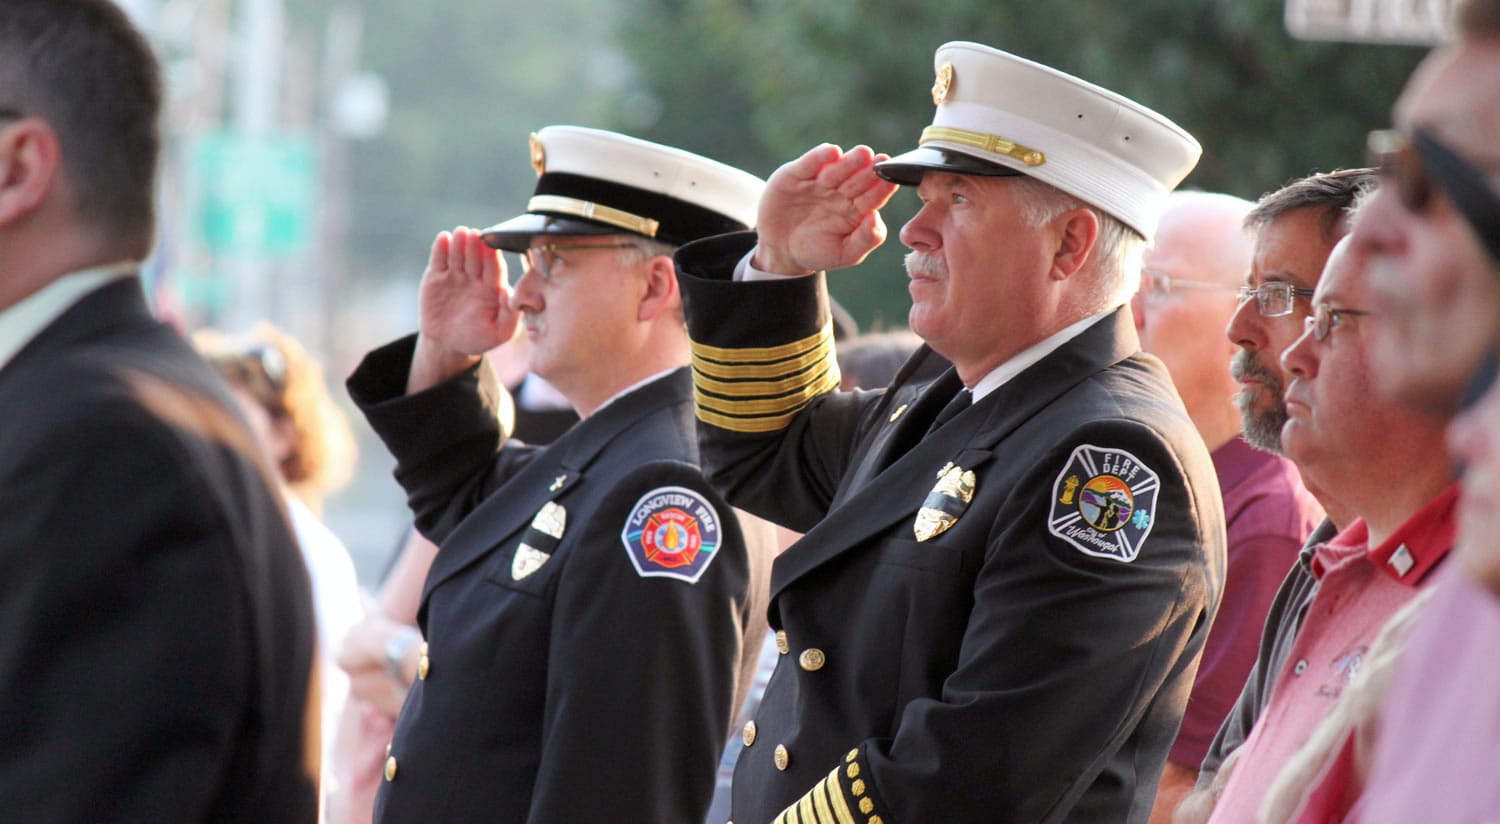 Washougal Fire Chief Ron Schumacher (right) and Longview Battalion Chief Kevin Taylor (left) stand at attention as Camas Battalion Chief Allen Wolk and Camas Fire Capt. Chuck Bettis (not pictured) raise the American flag to half-mast in front of the Camas Public Library Sunday morning, in recognition of the 10-year anniversary of the Sept.